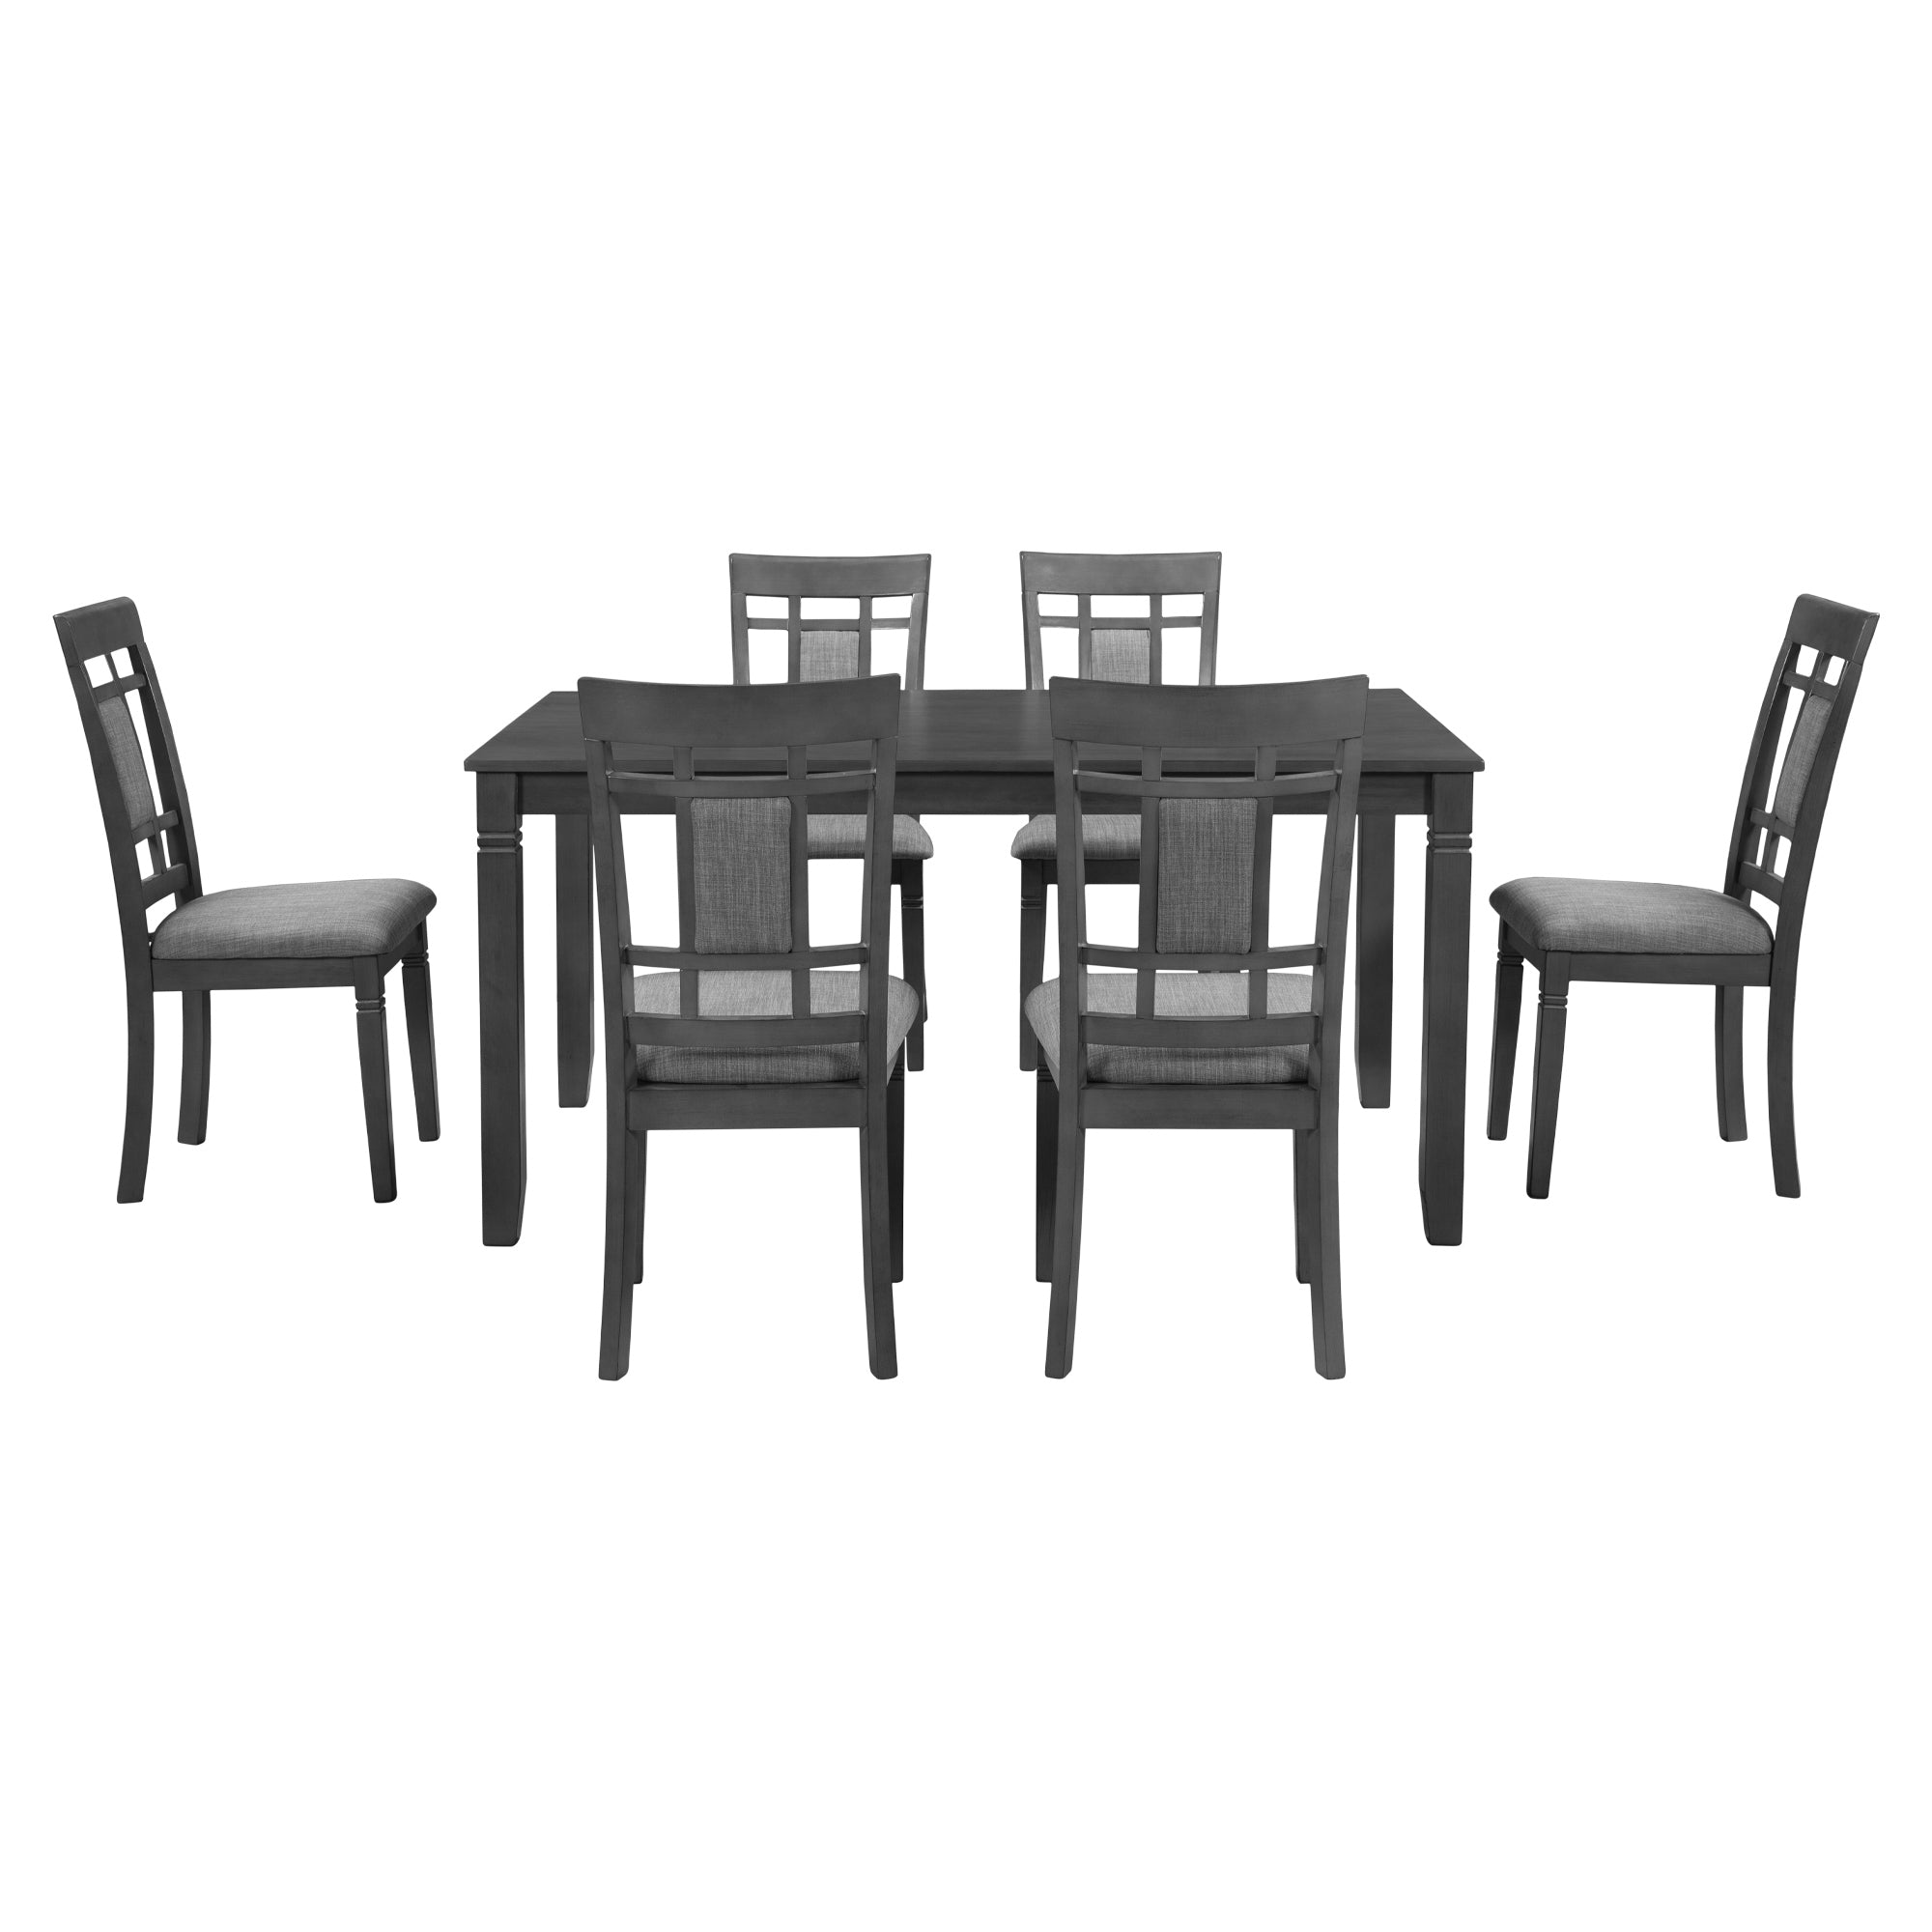 TOPMAX 7-Piece Farmhouse Rustic Wooden Dining Table Set Kitchen Furniture Set with 6 Padded Dining Chairs (Gray)